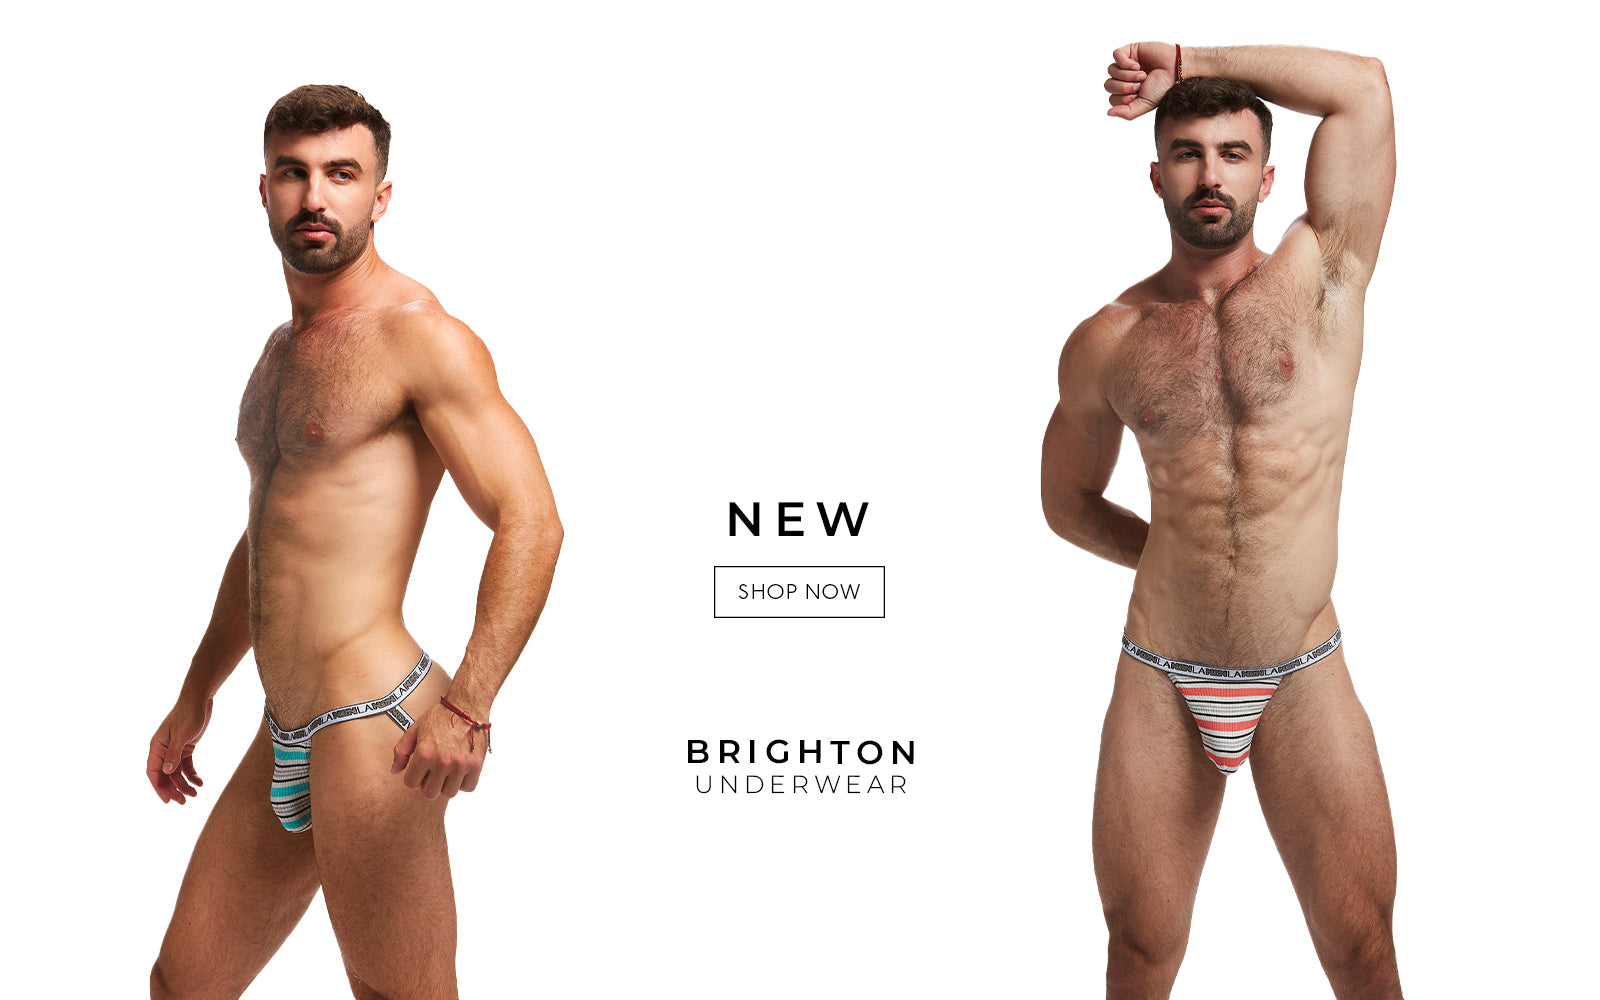 N2N- Mens sexiest and most comfortable underwear/ Made in the